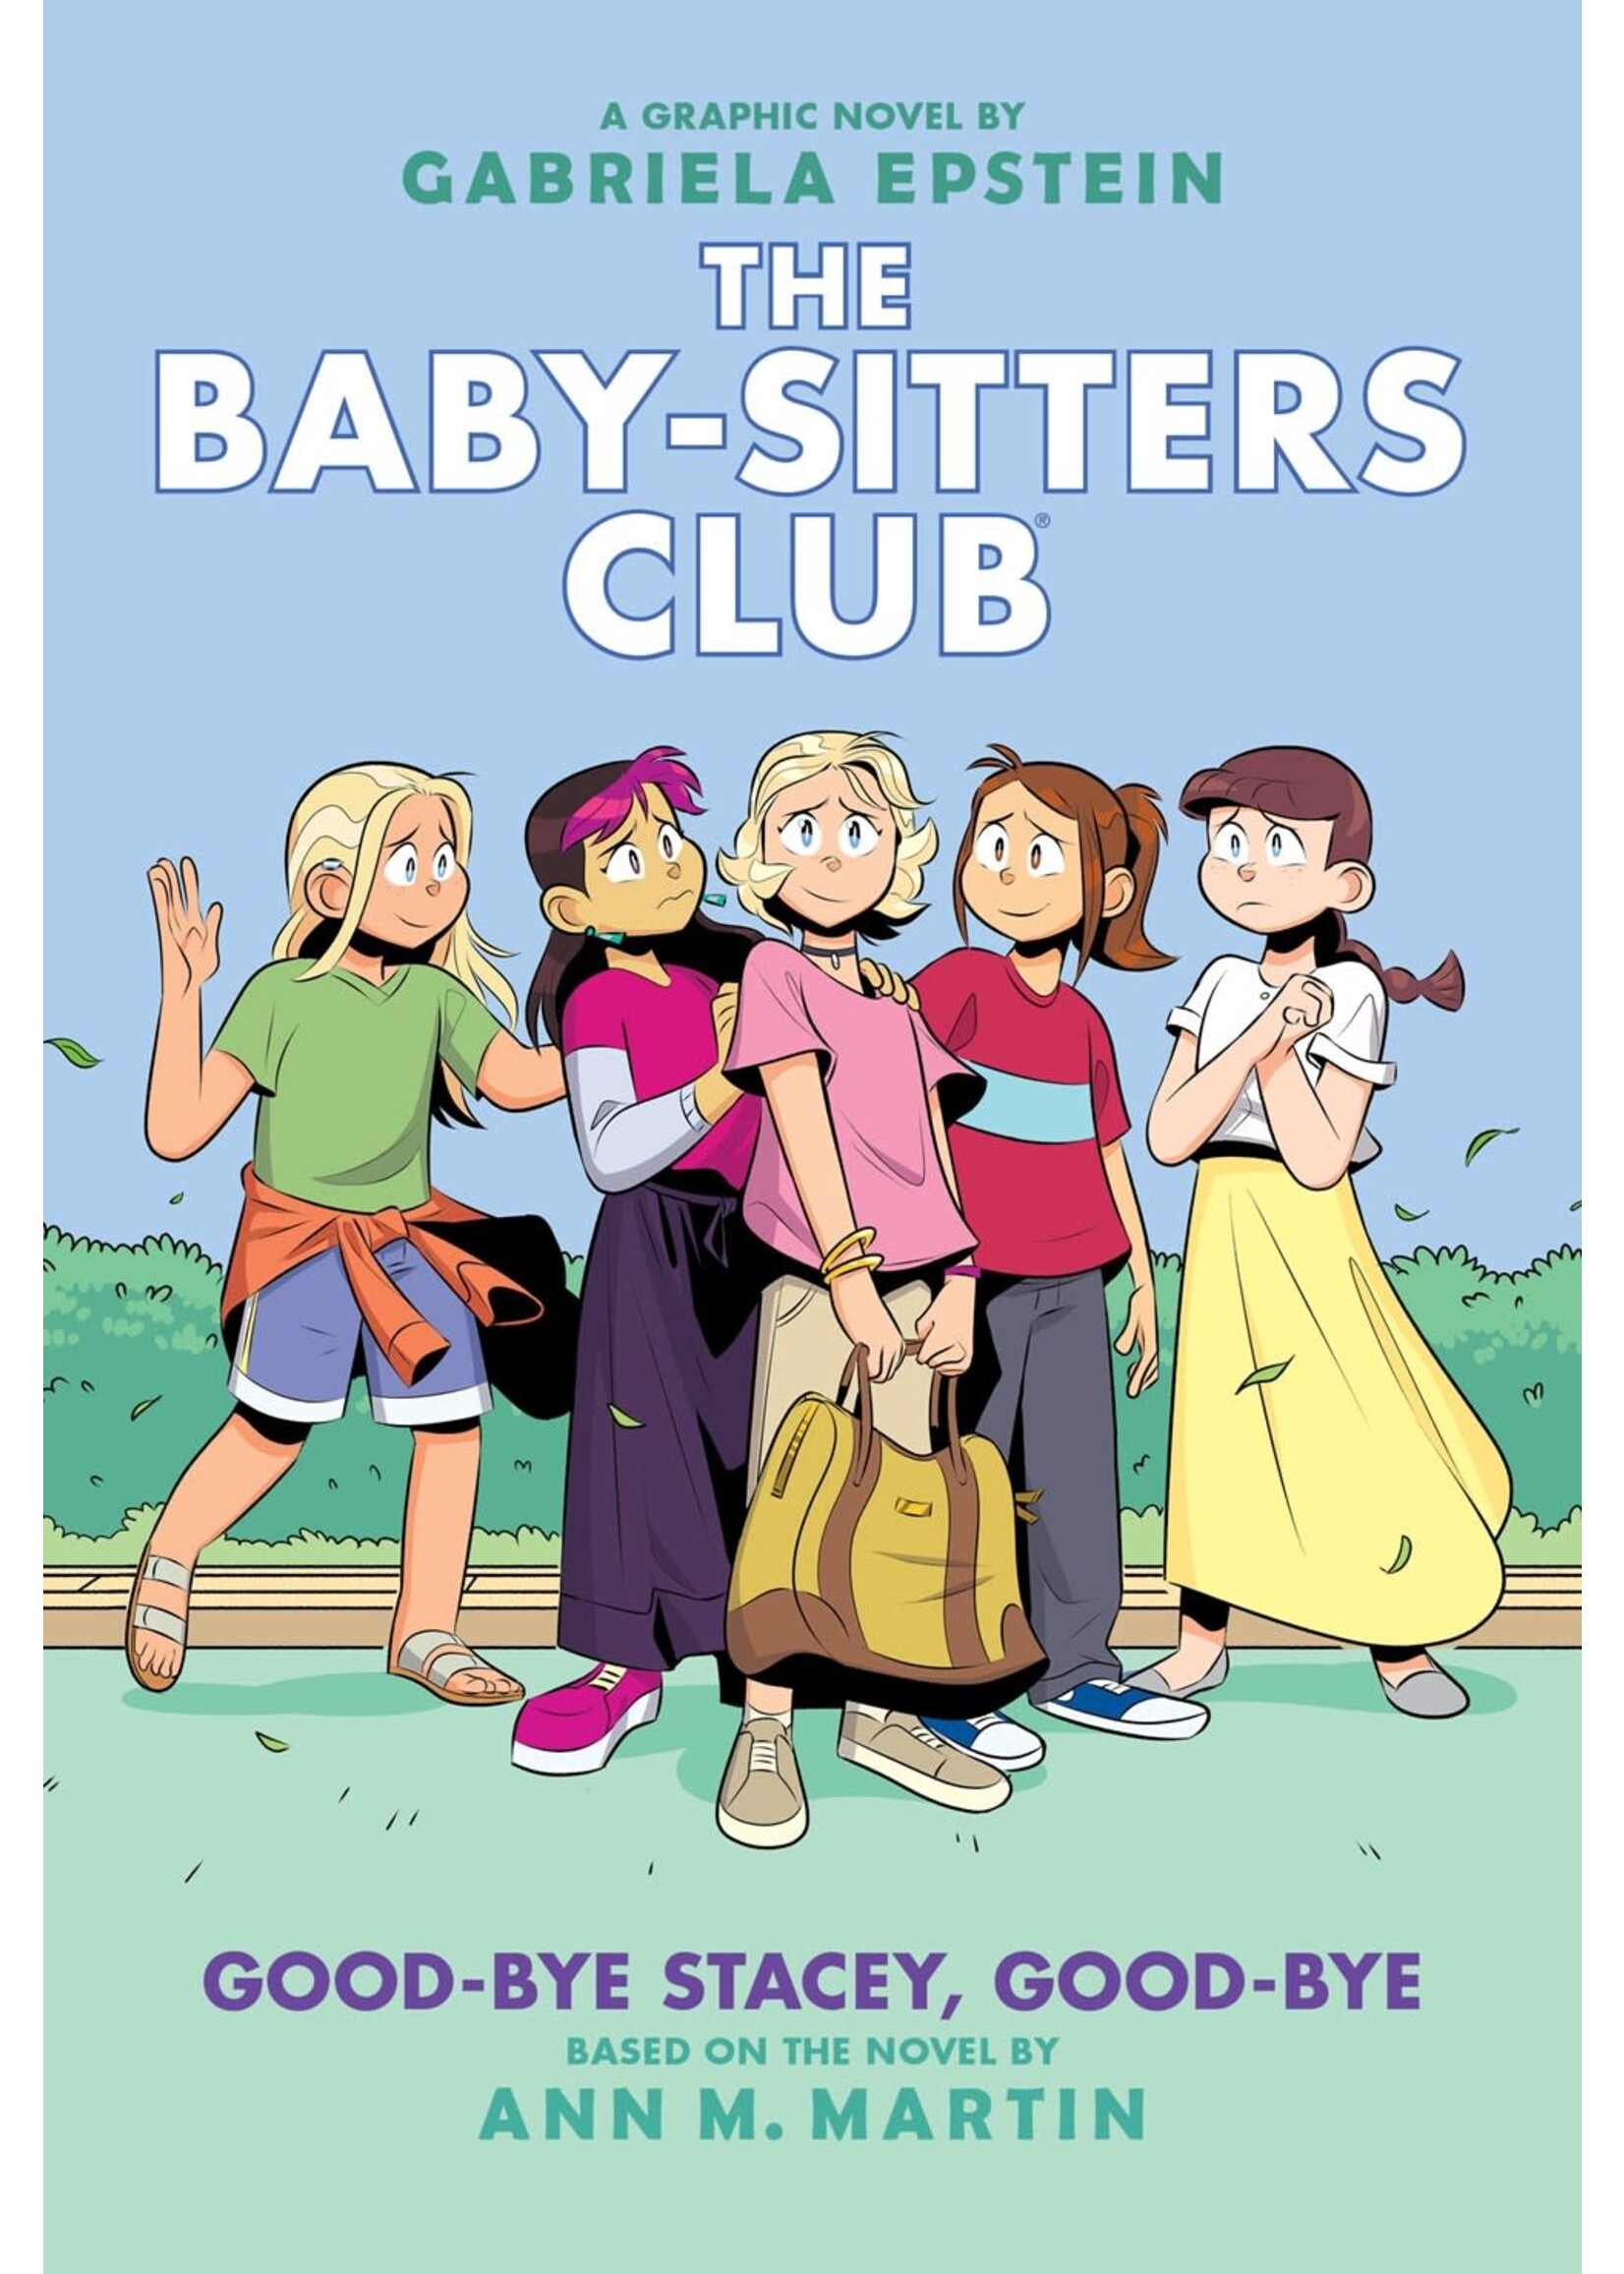 Good-bye Stacey, Good-bye (Baby-Sitters Club Graphic Novels #11) by Gabriela Epstein